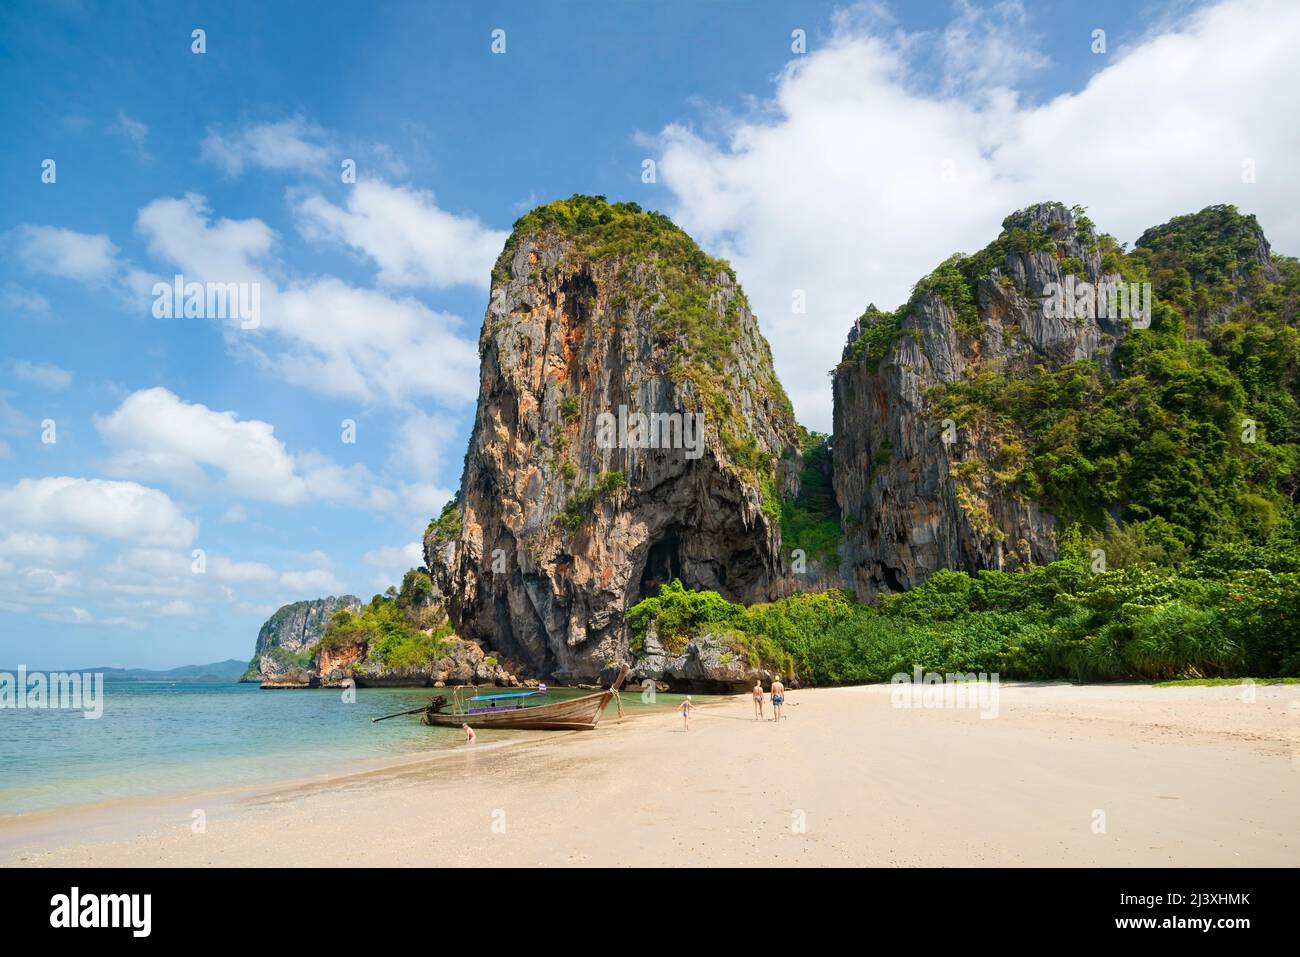 Amazing tropical view of Phra Nang Beach. People on the white sand, long-tail boats in the sea, Ao Nang, Krabi, Thailand Stock Photo